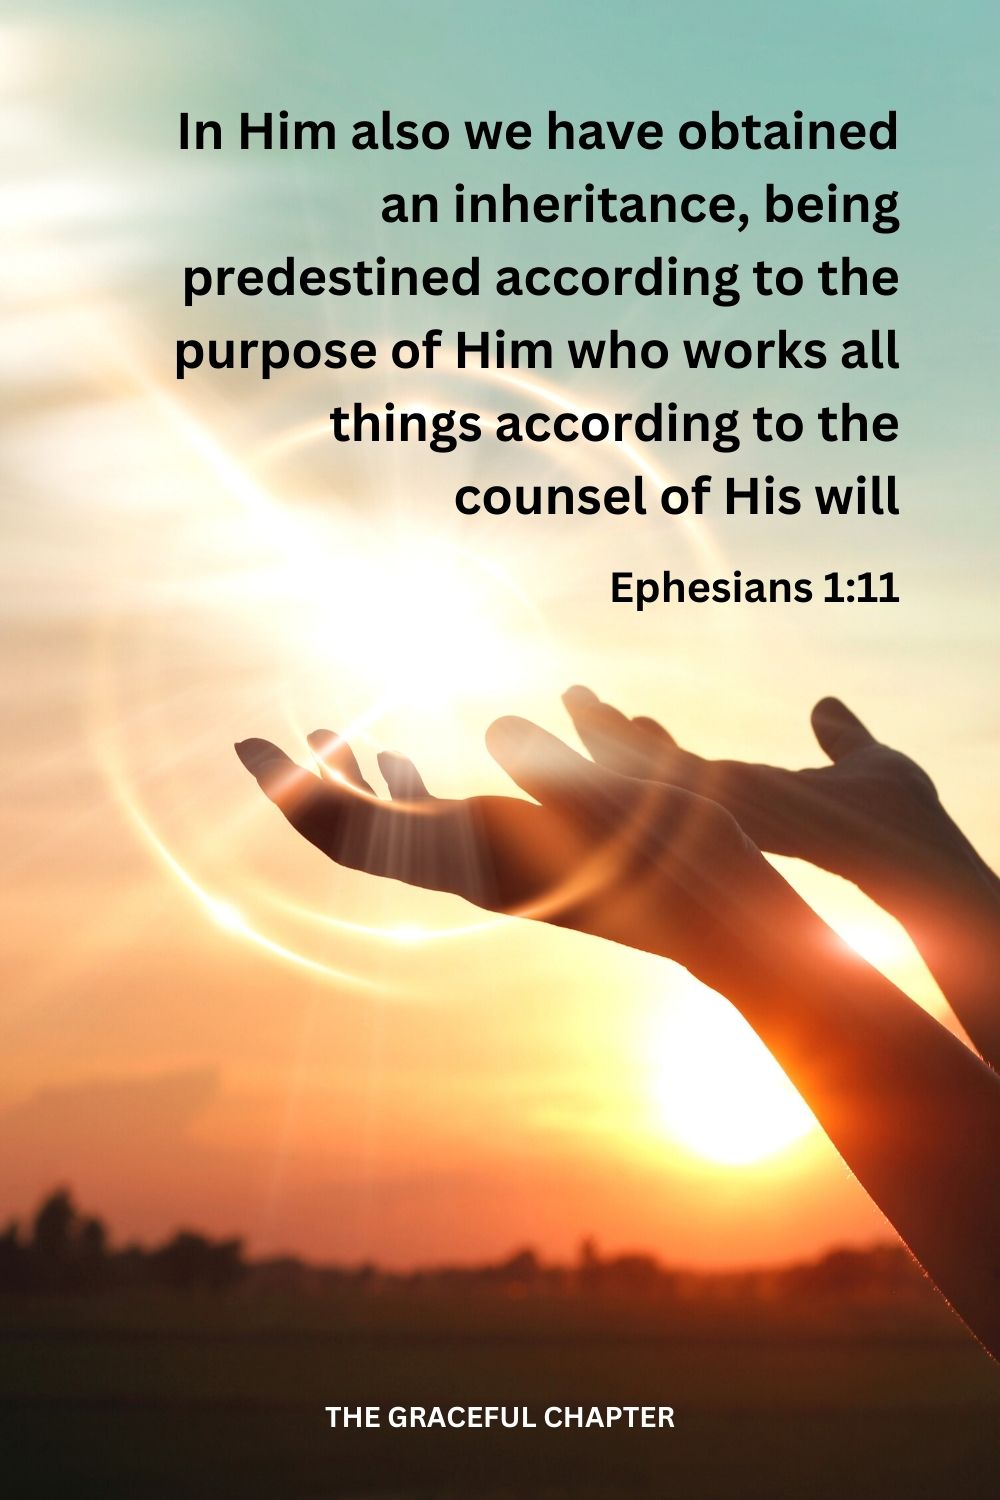 In Him also we have obtained an inheritance, being predestined according to the purpose of Him who works all things according to the counsel of His will Ephesians 1:11